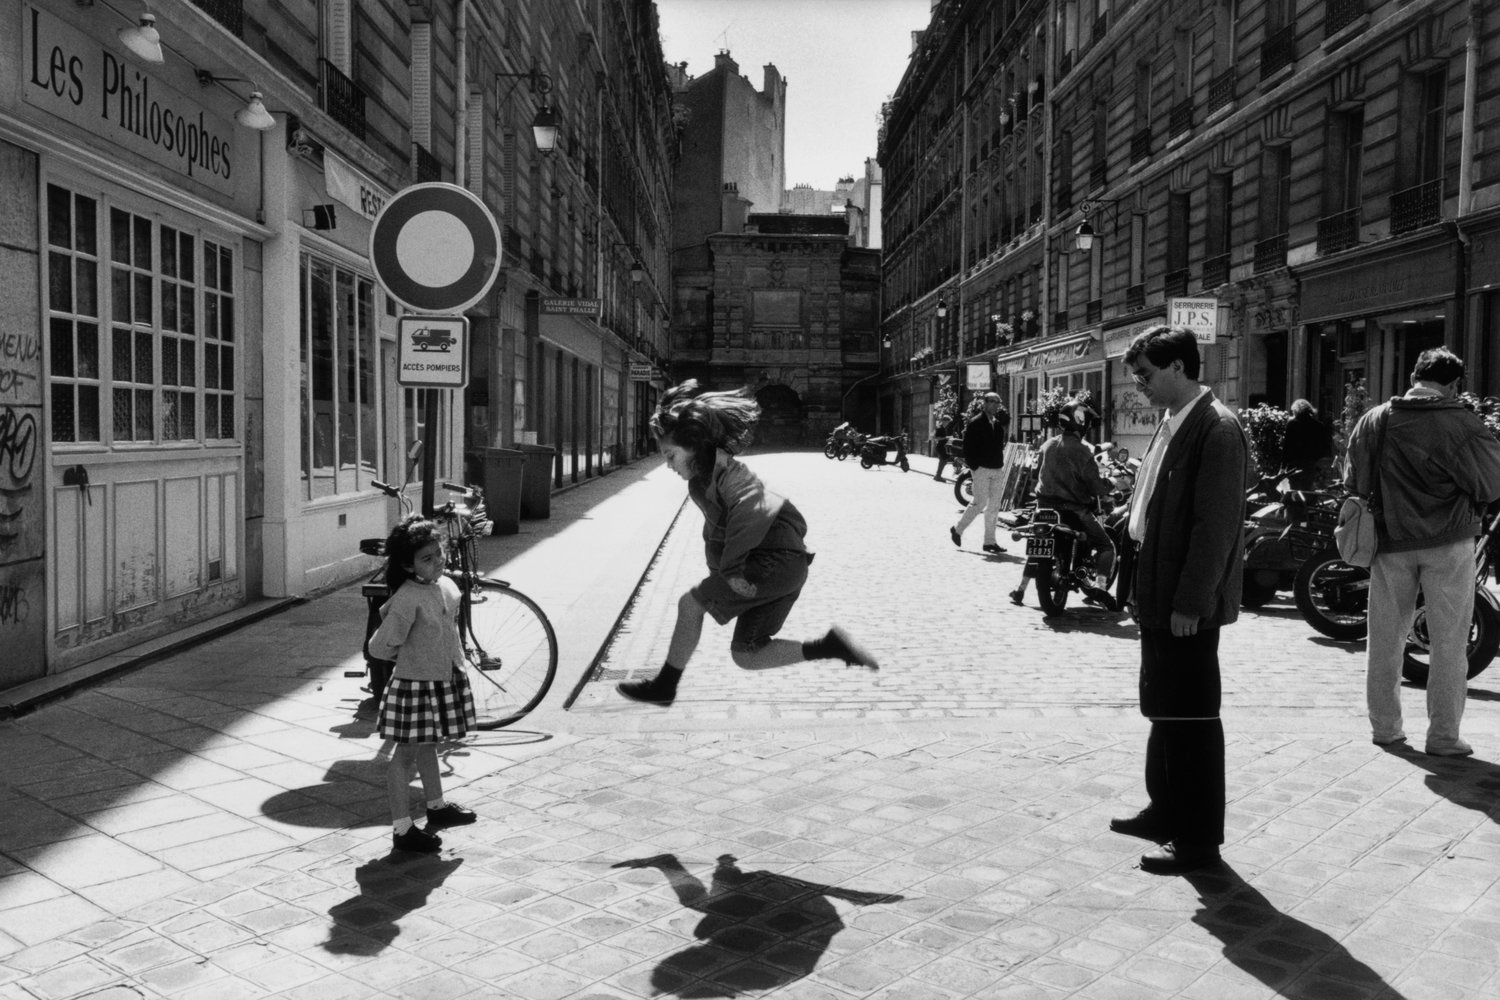 Children playing in the streets of Paris - Photo by Peter Turnley